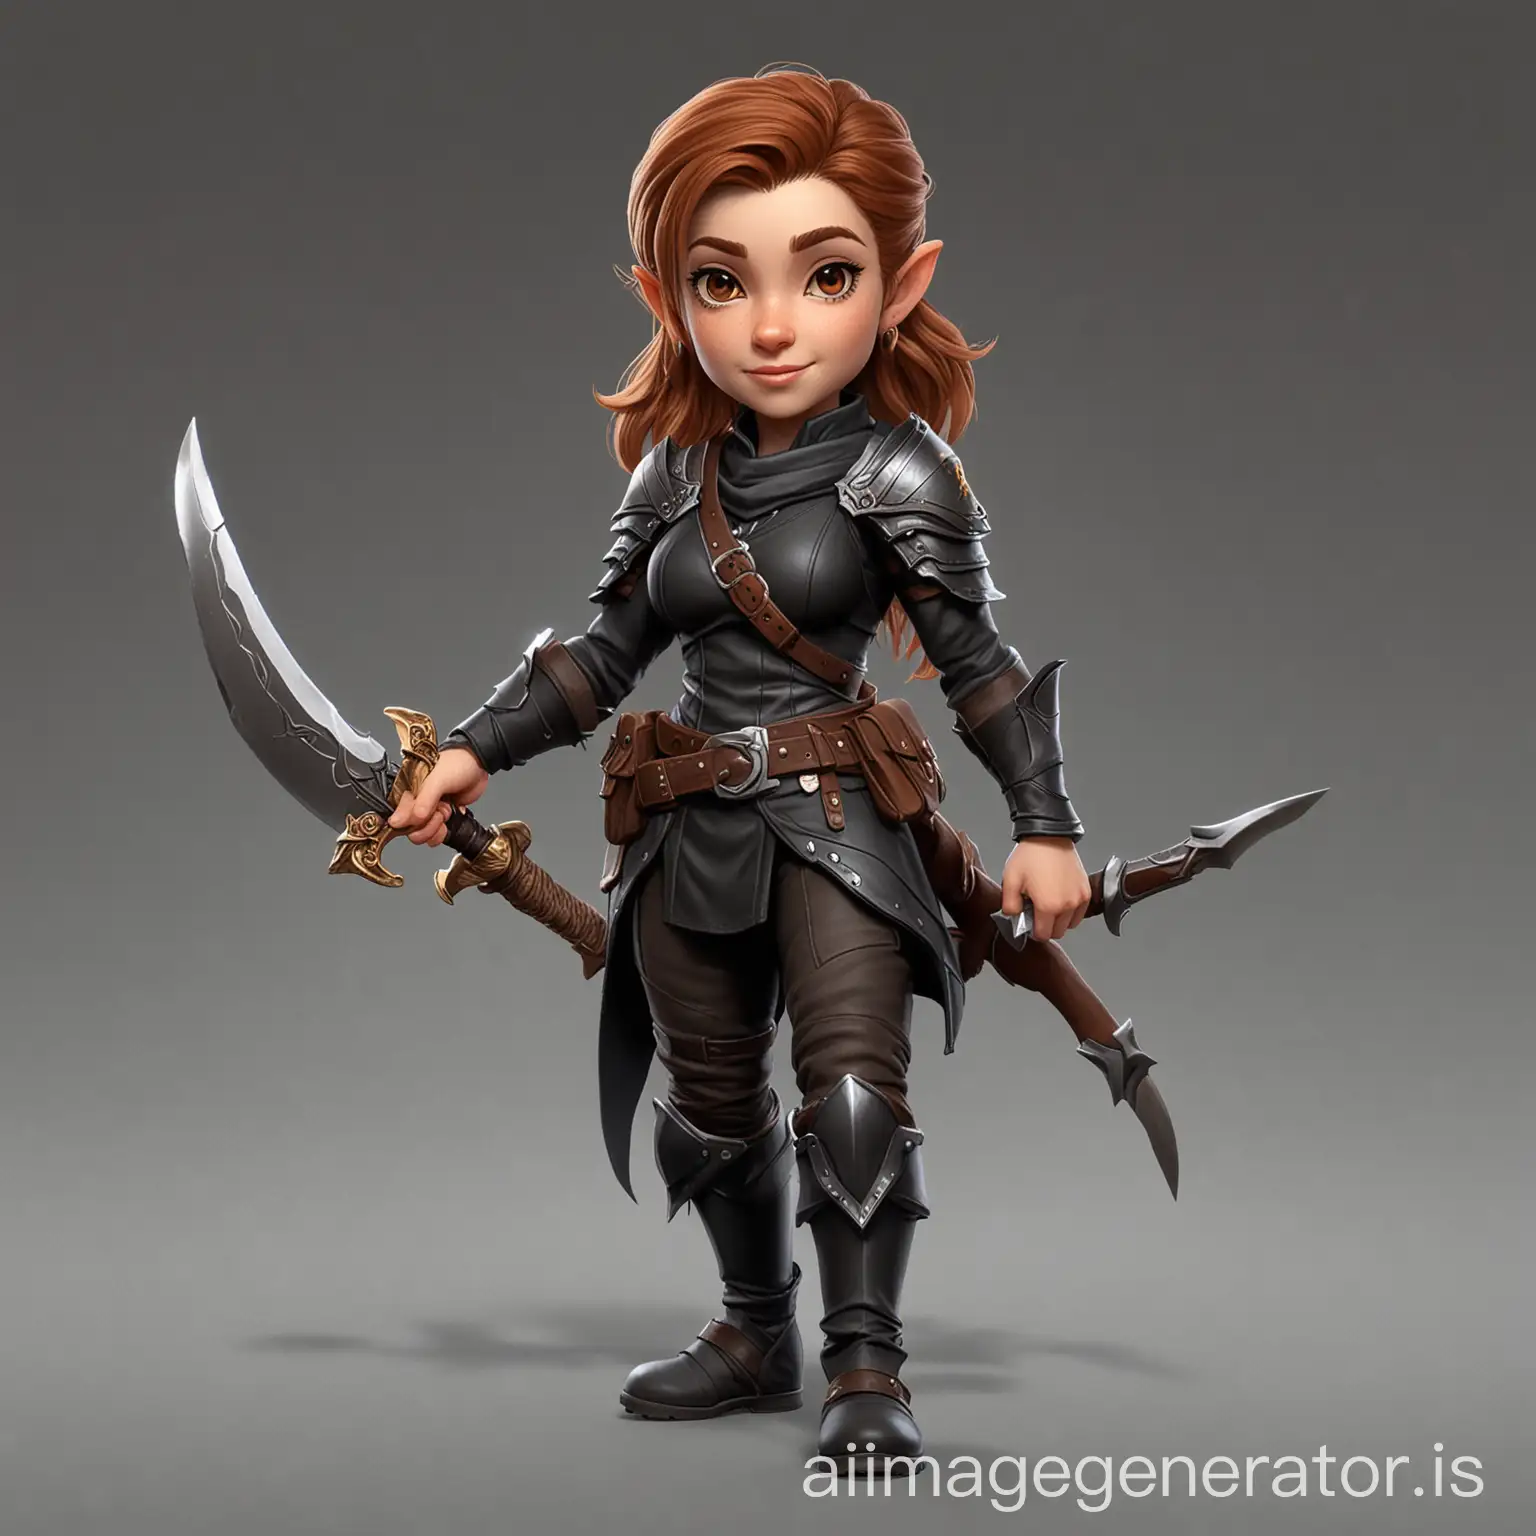 Dnd inspired female halfling with brown hair in a black outfit and holding a sharp kukri